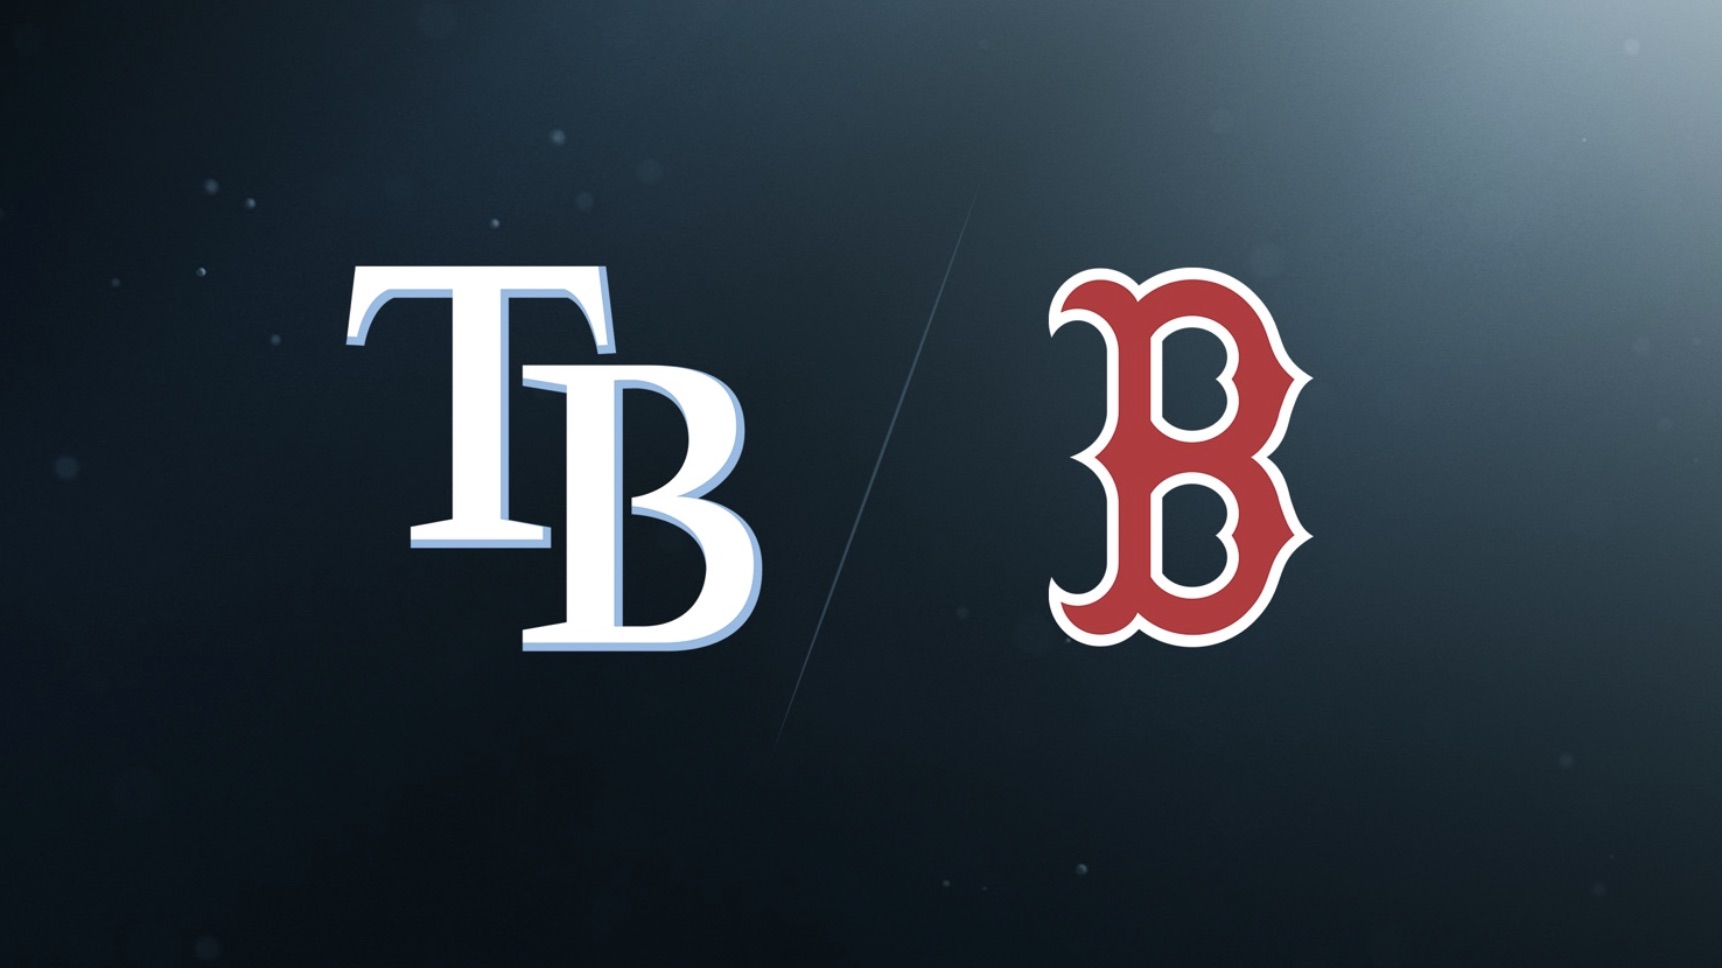 Friday Night Baseball How to watch Tampa Bay Rays at Boston Red Sox on Apple TV Plus free iMore